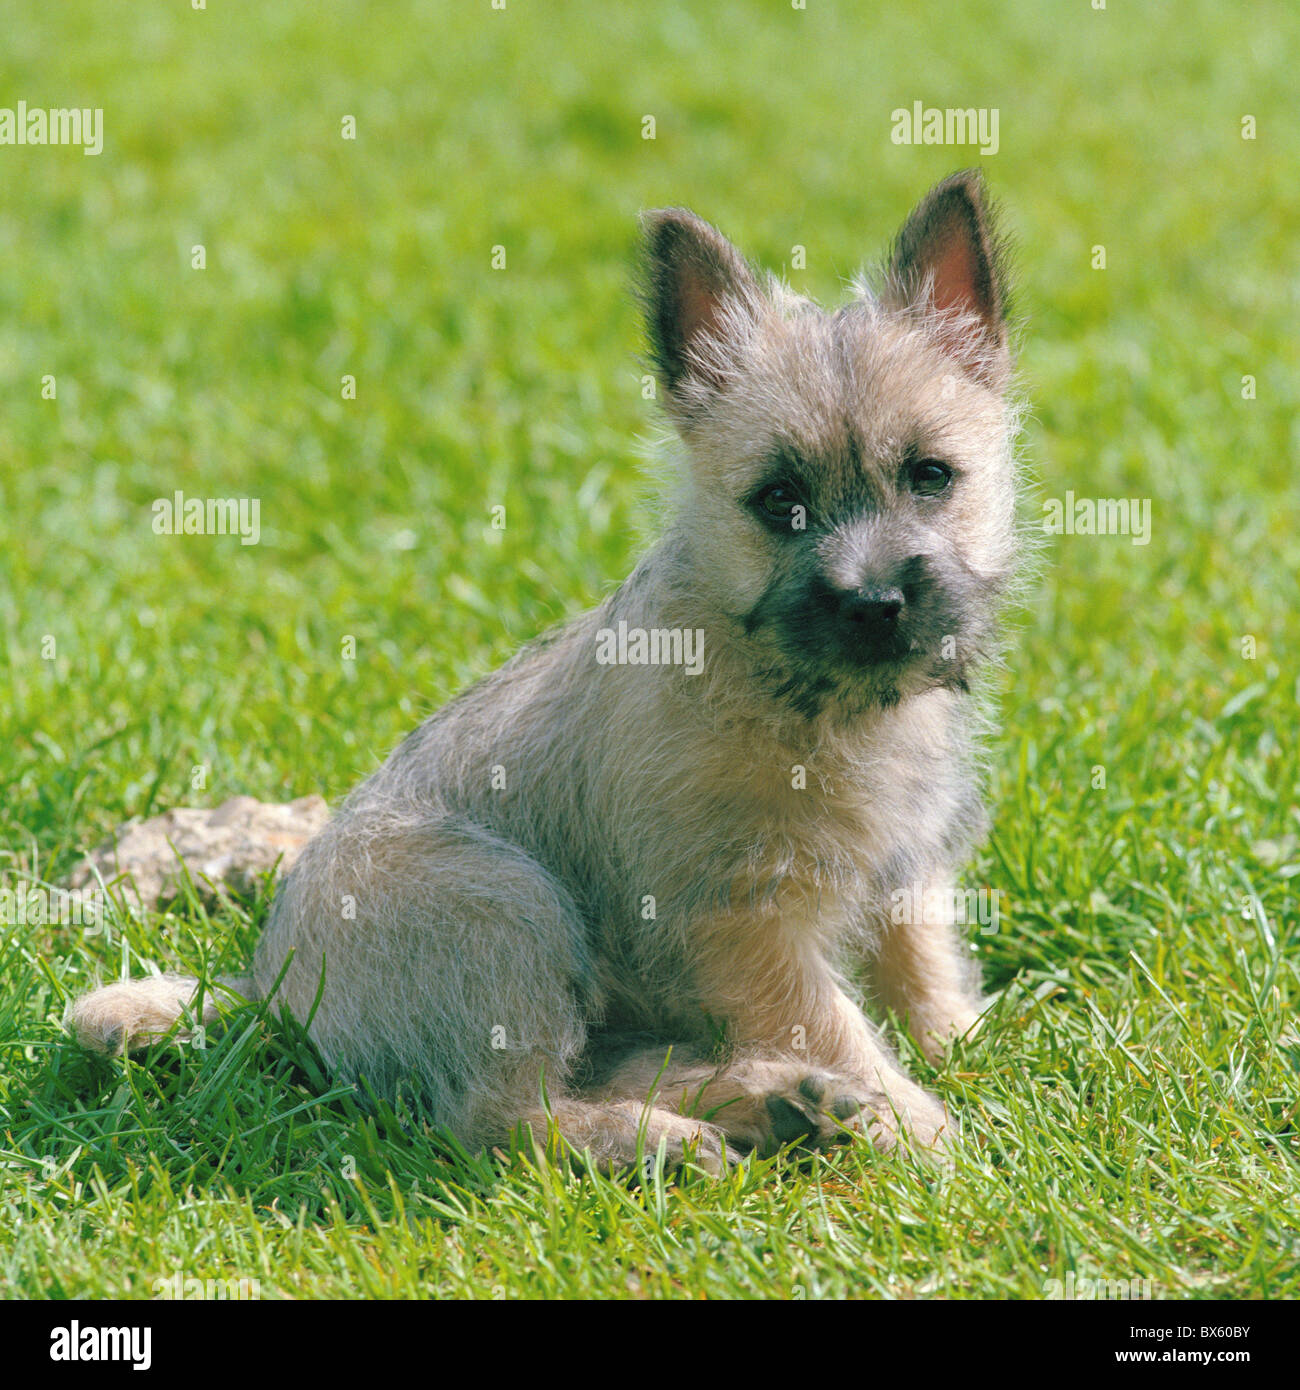 Cairn Terrier puppy sitting on lawn Stock Photo